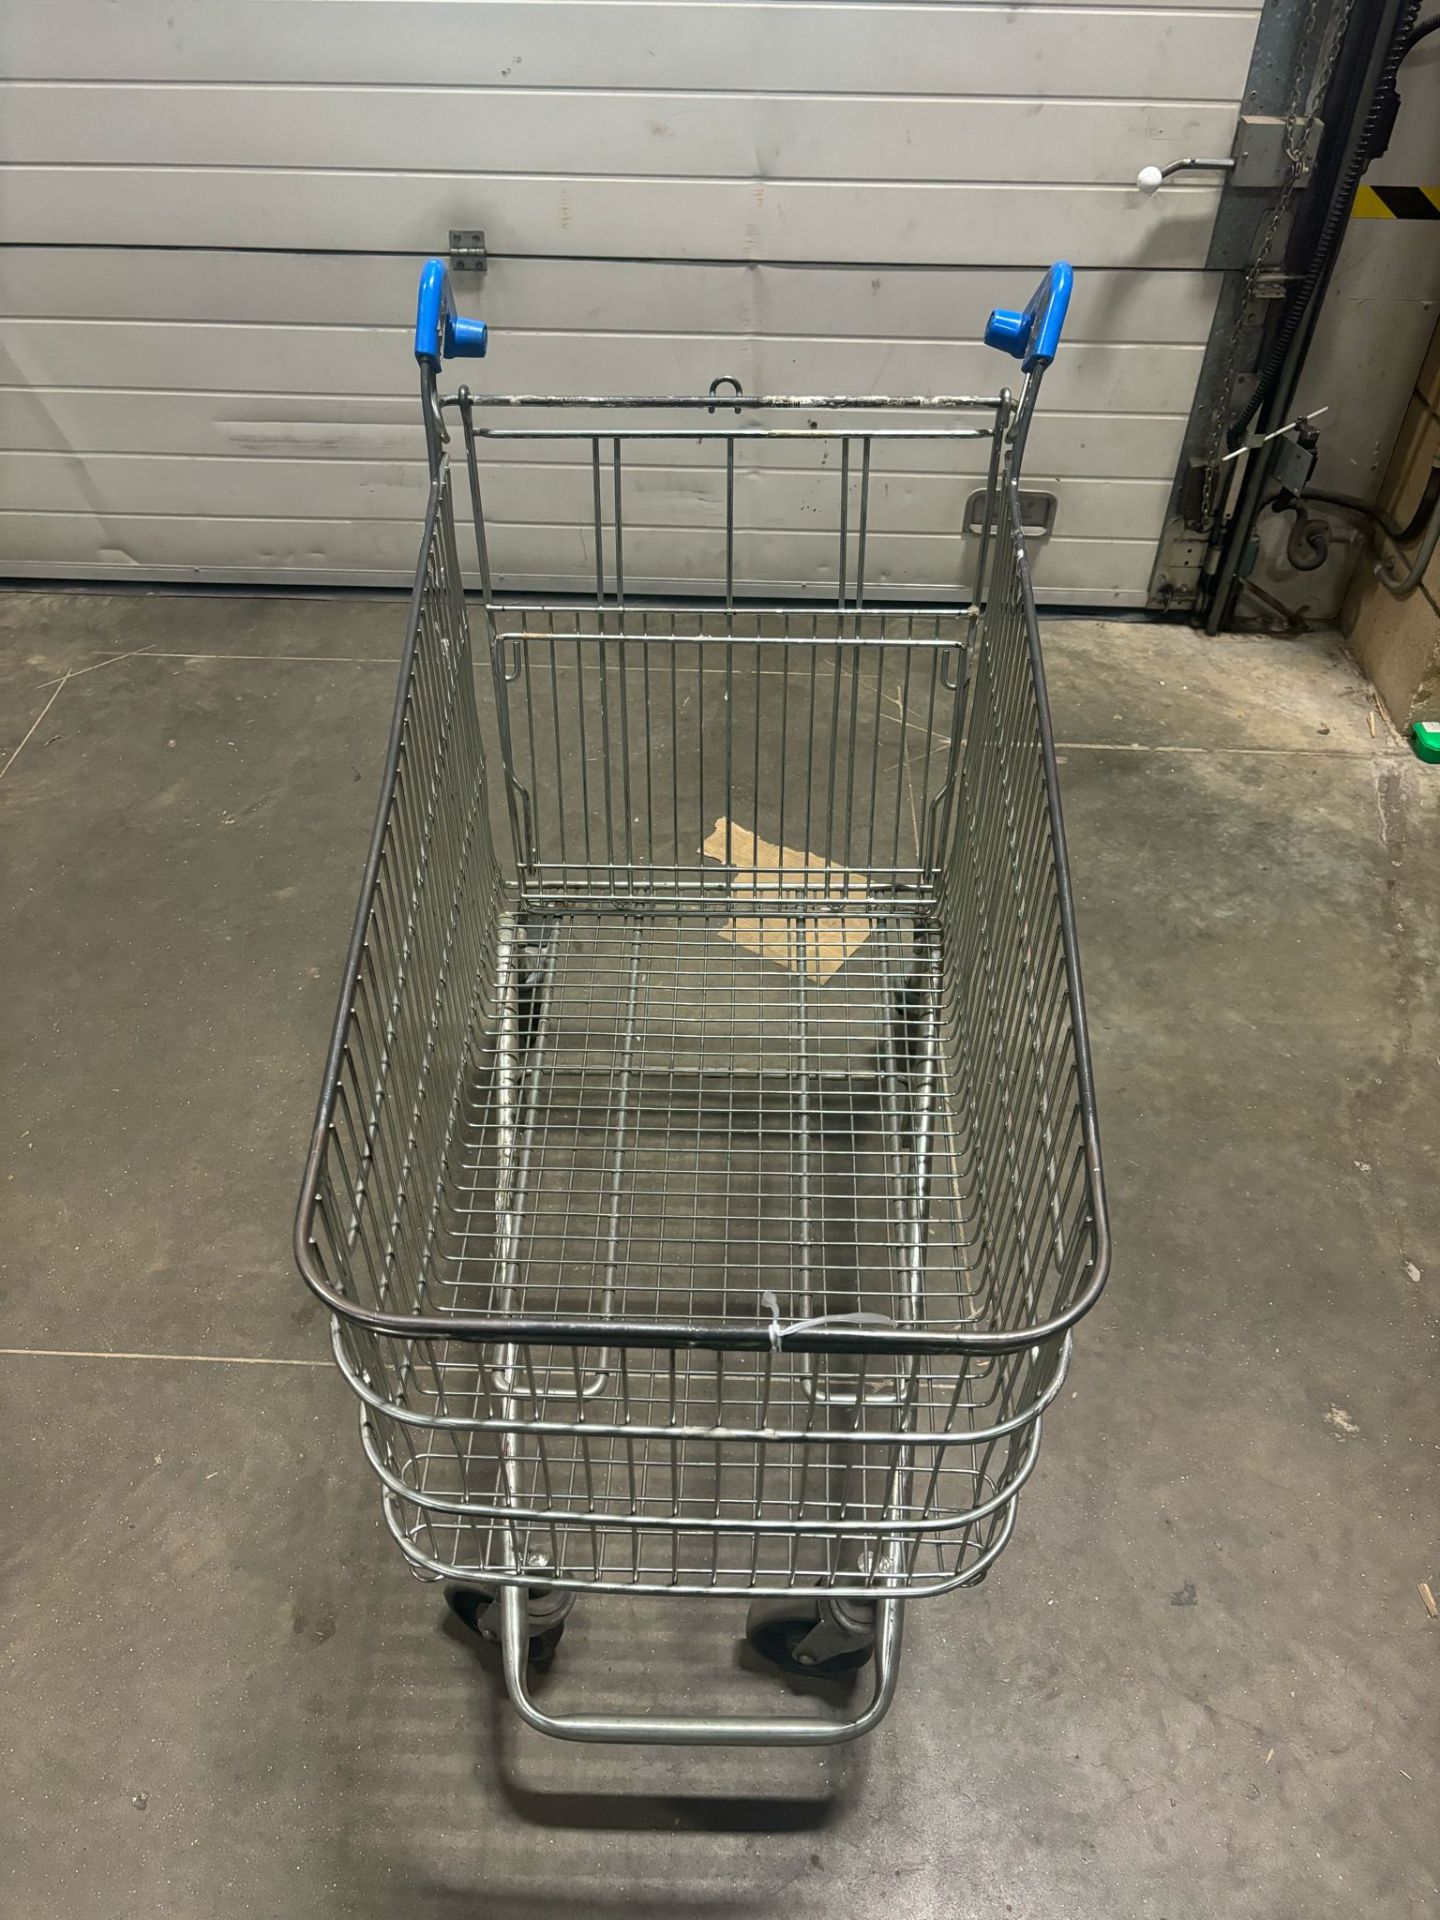 WAREHOUSE SHOPPING TROLLEY FOR WORKSHOP GOODS MOVEMENT MOBILE PICKING UNIT